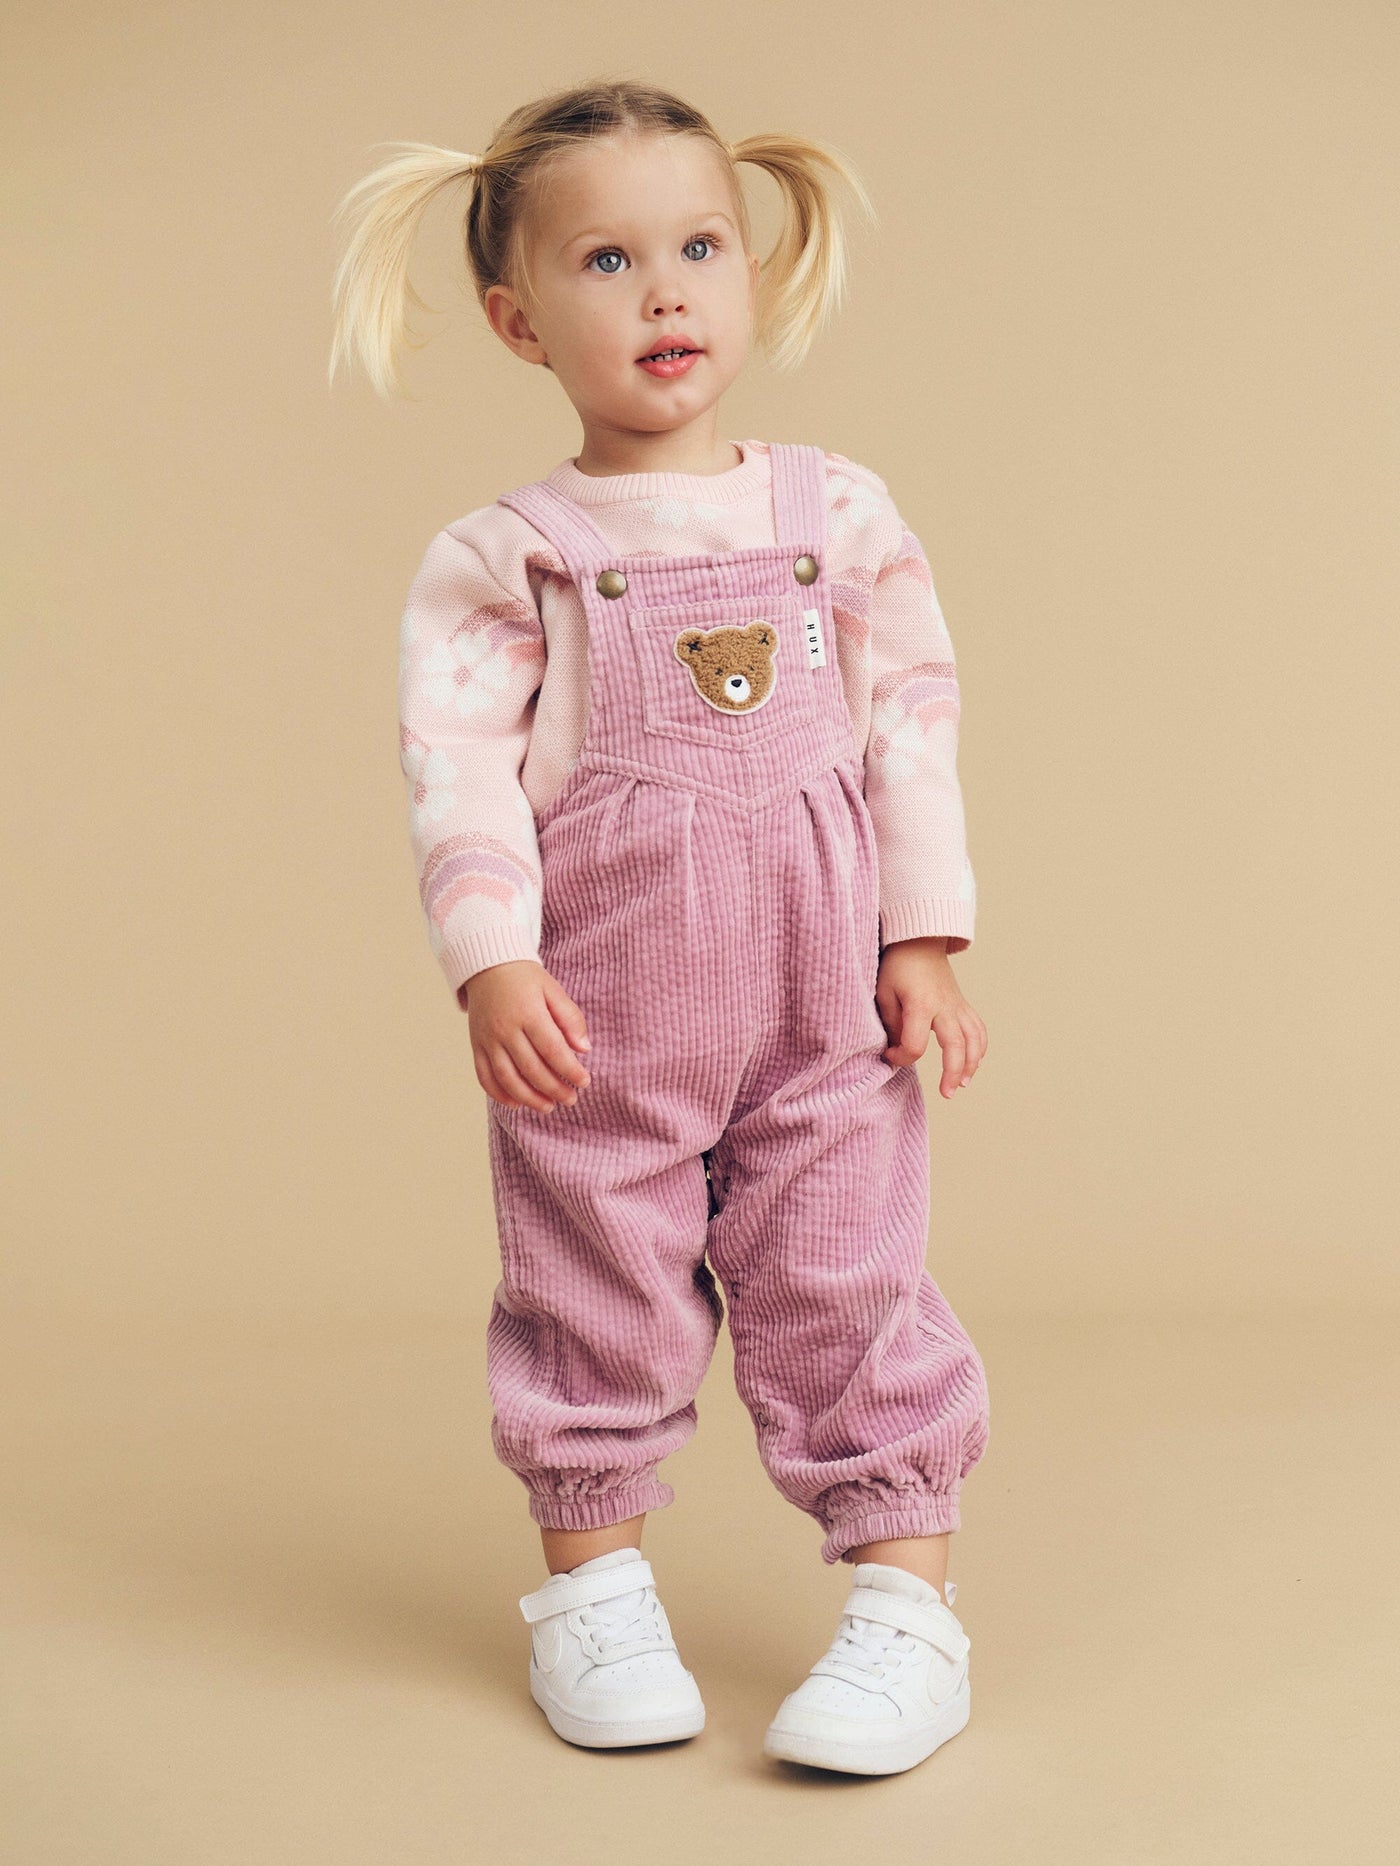 Huxbaby Orchid Cord Overalls HB0055W24 Overalls Huxbaby 